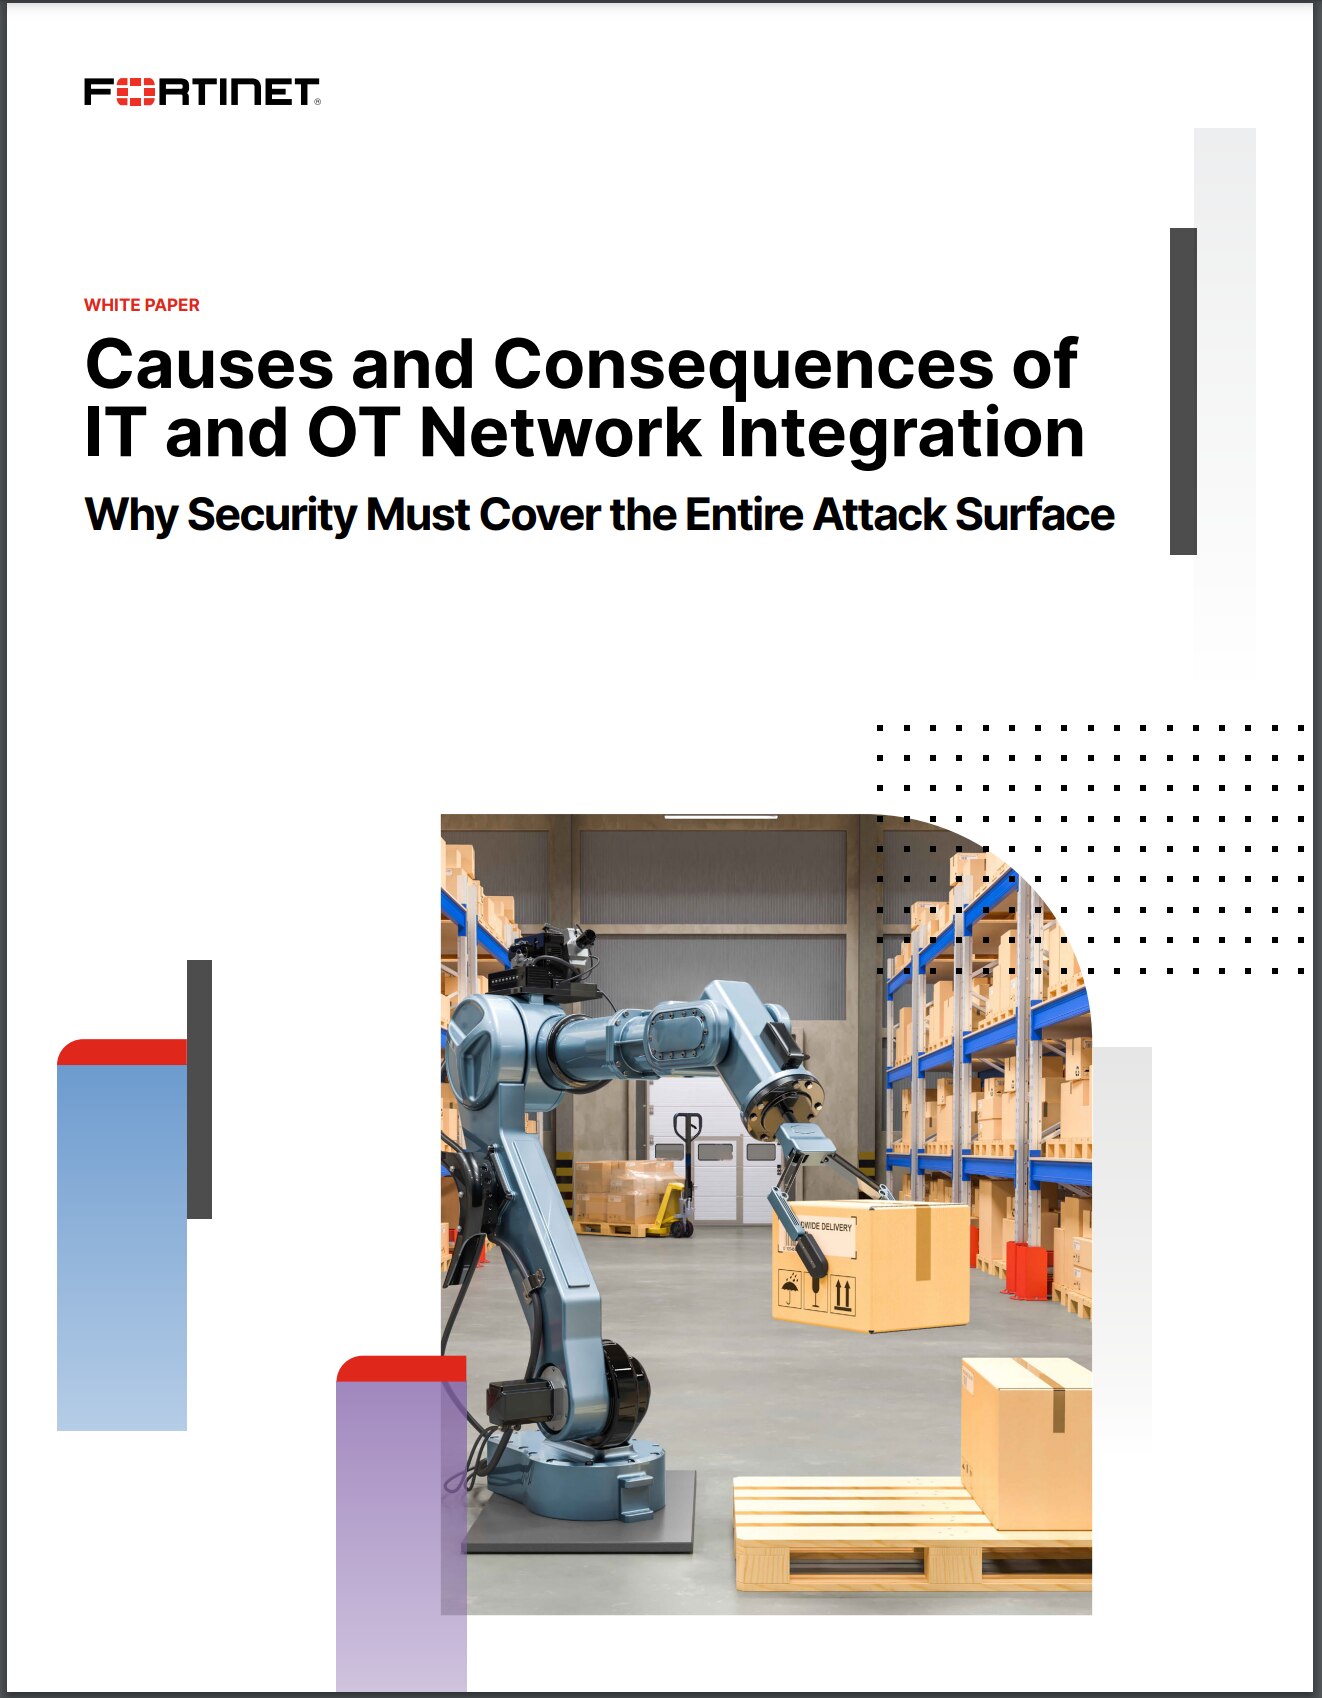 WP-Causes and Consequences of IT and OT Network Integration (sold in package, 10pc per package)